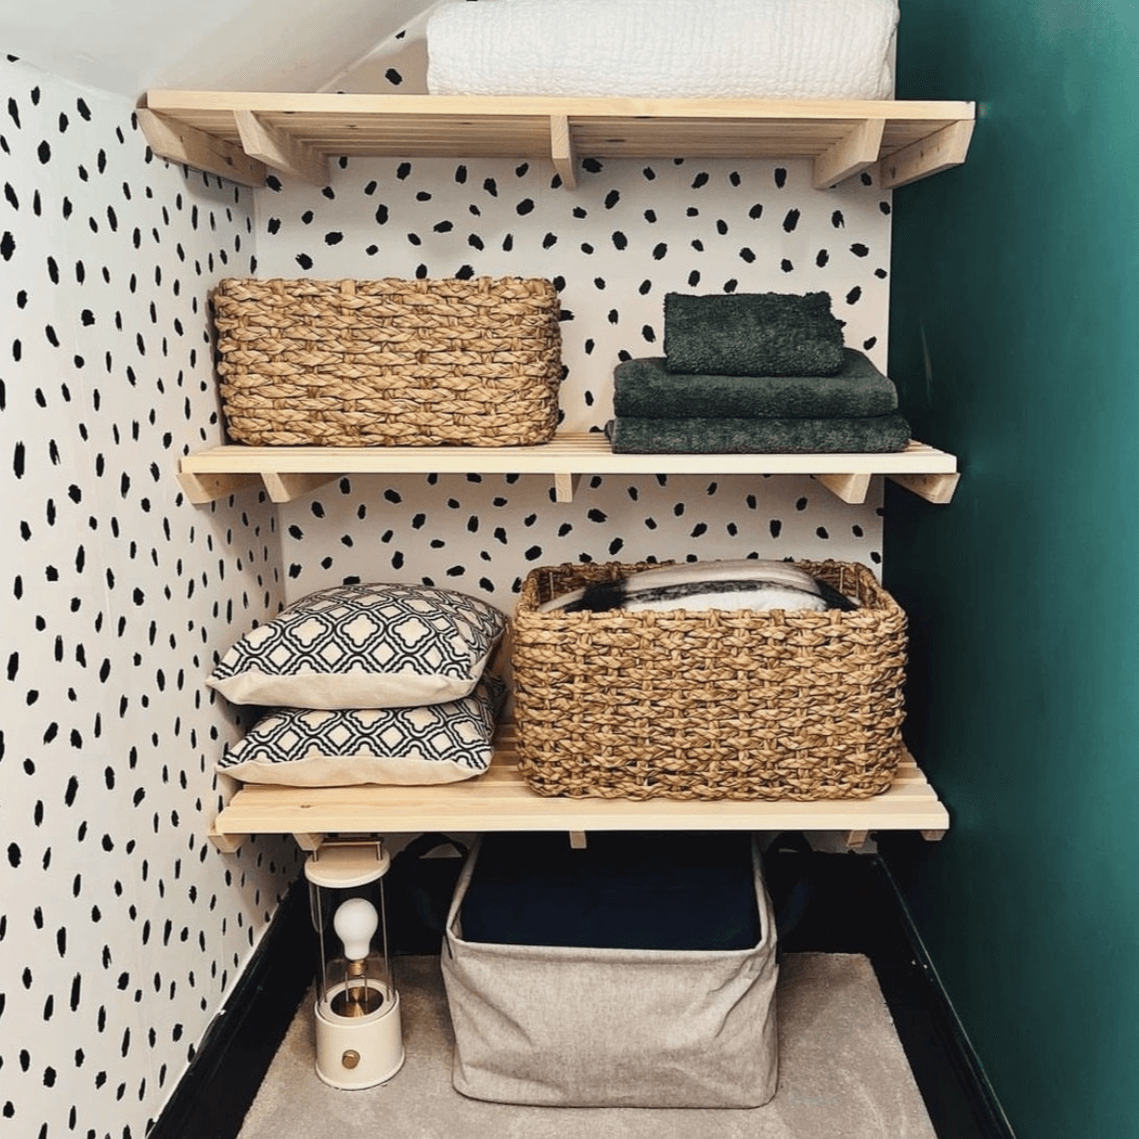 Airing Cupboard Wooden Slatted Shelves - 90.5 cm by 56 cm